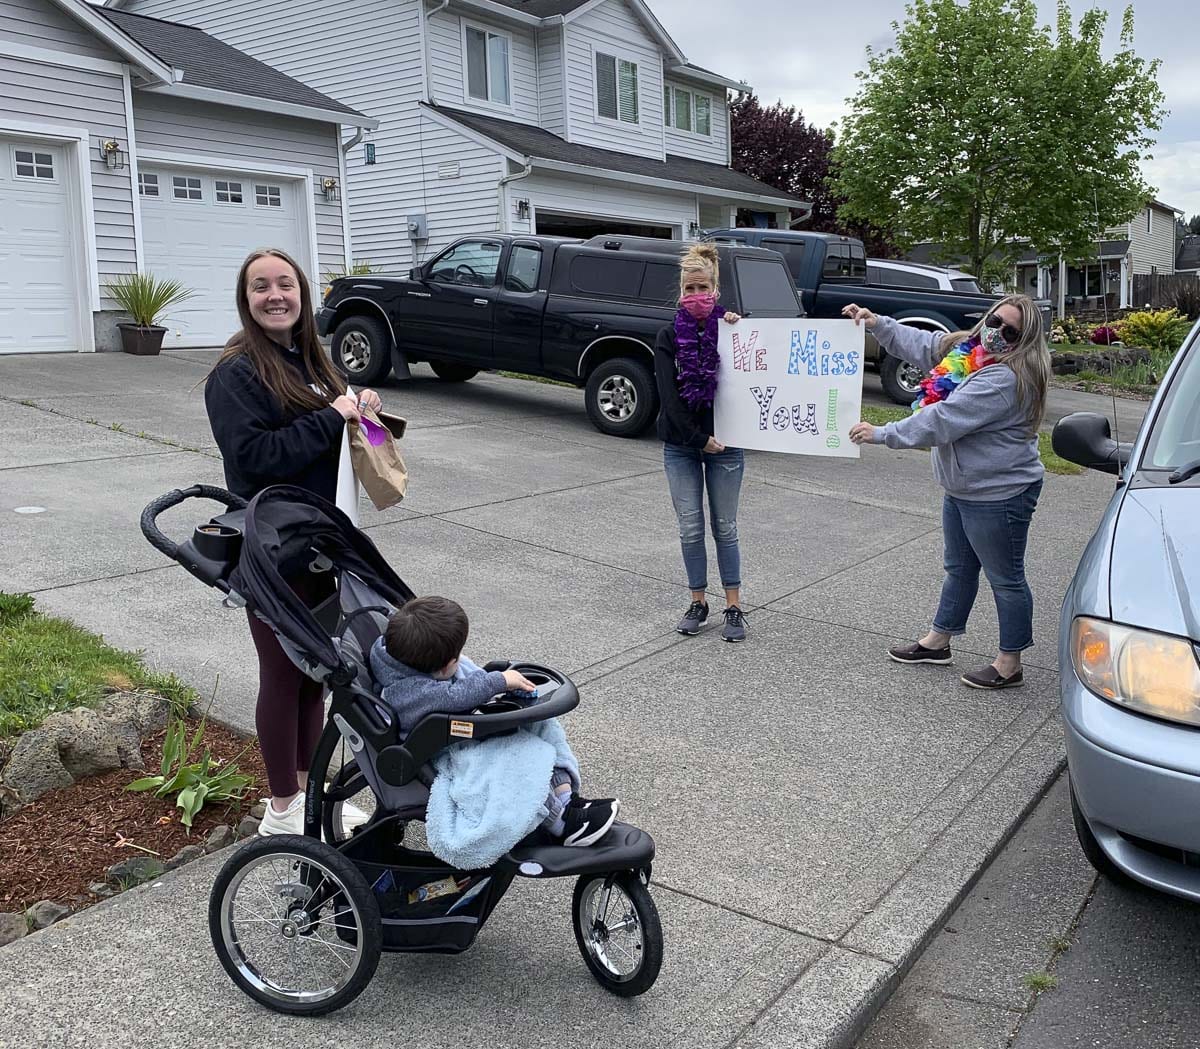 The PASS team is excited to see their students during deliveries ... if only at an appropriate distance due to social distancing guidelines. Photo courtesy of Woodland Public Schools